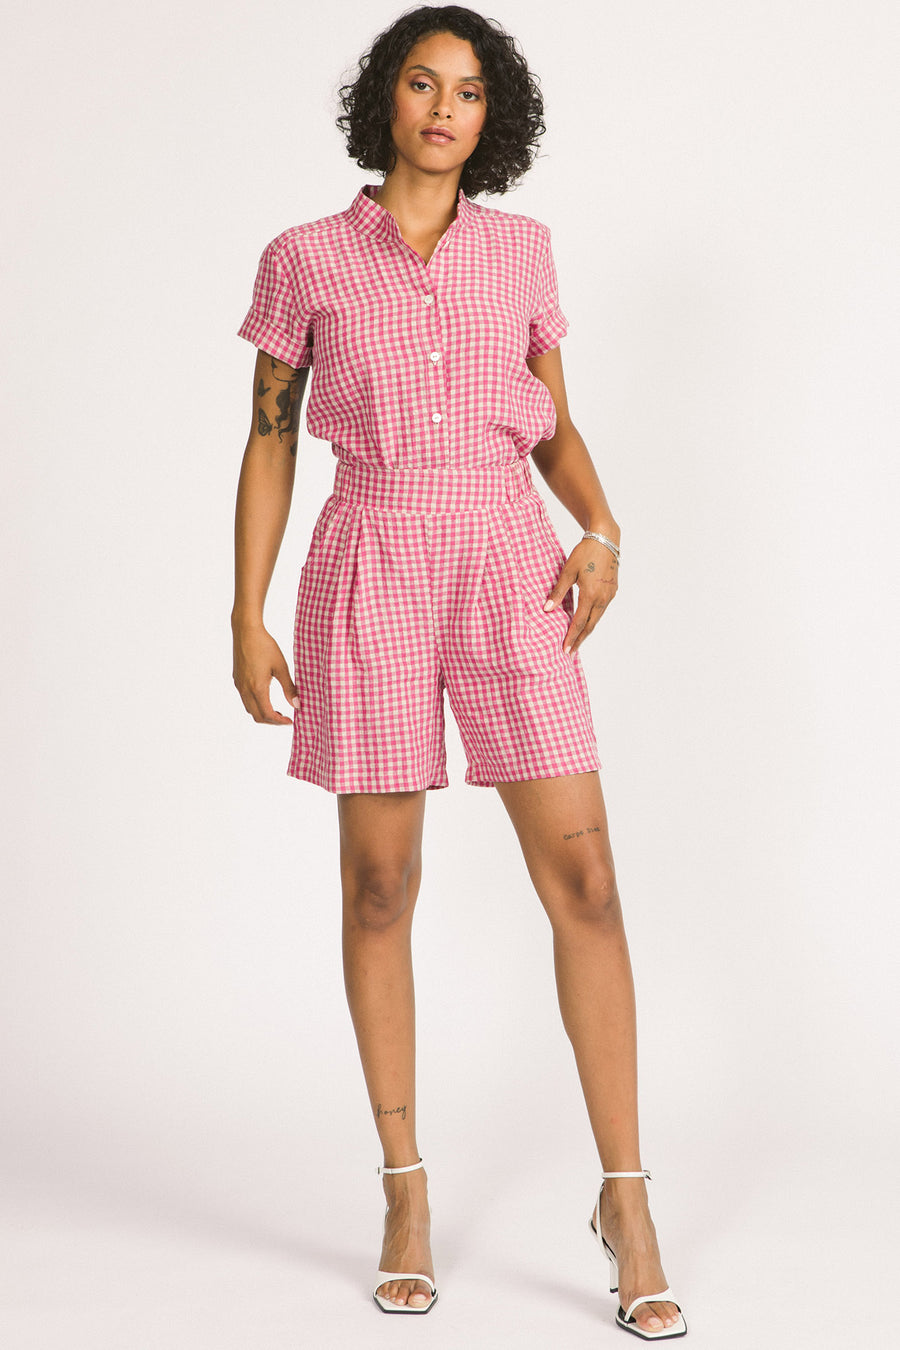 Woman wearing pink and white gingham Kim shorts by Allison Wonderland. 